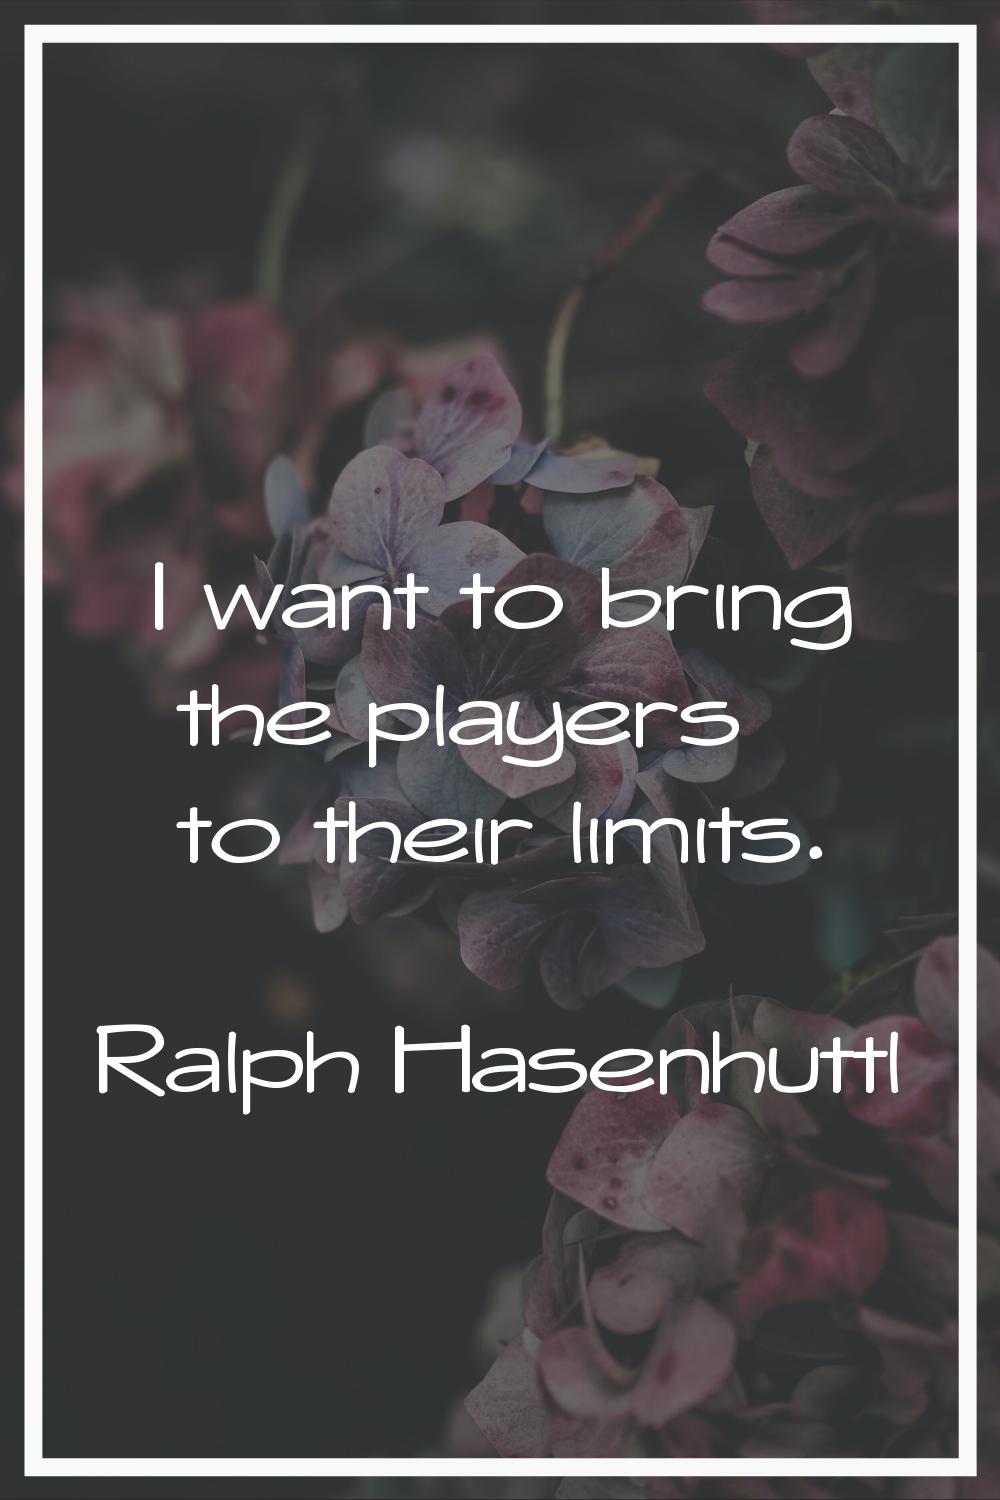 I want to bring the players to their limits.